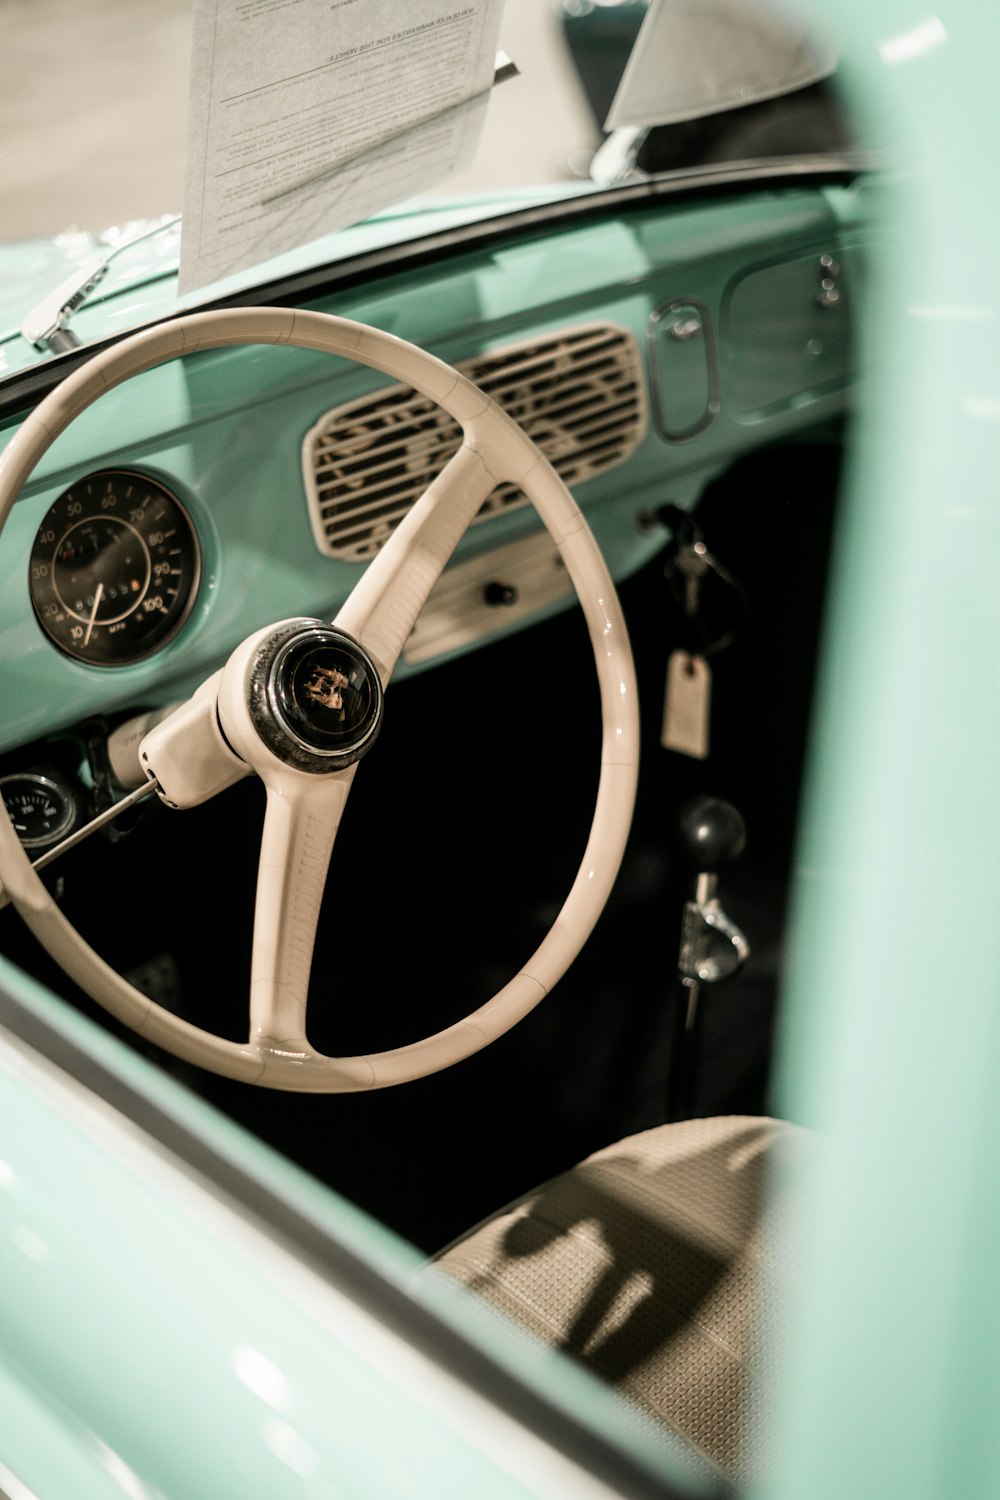 the interior of a car with a steering wheel and dashboard